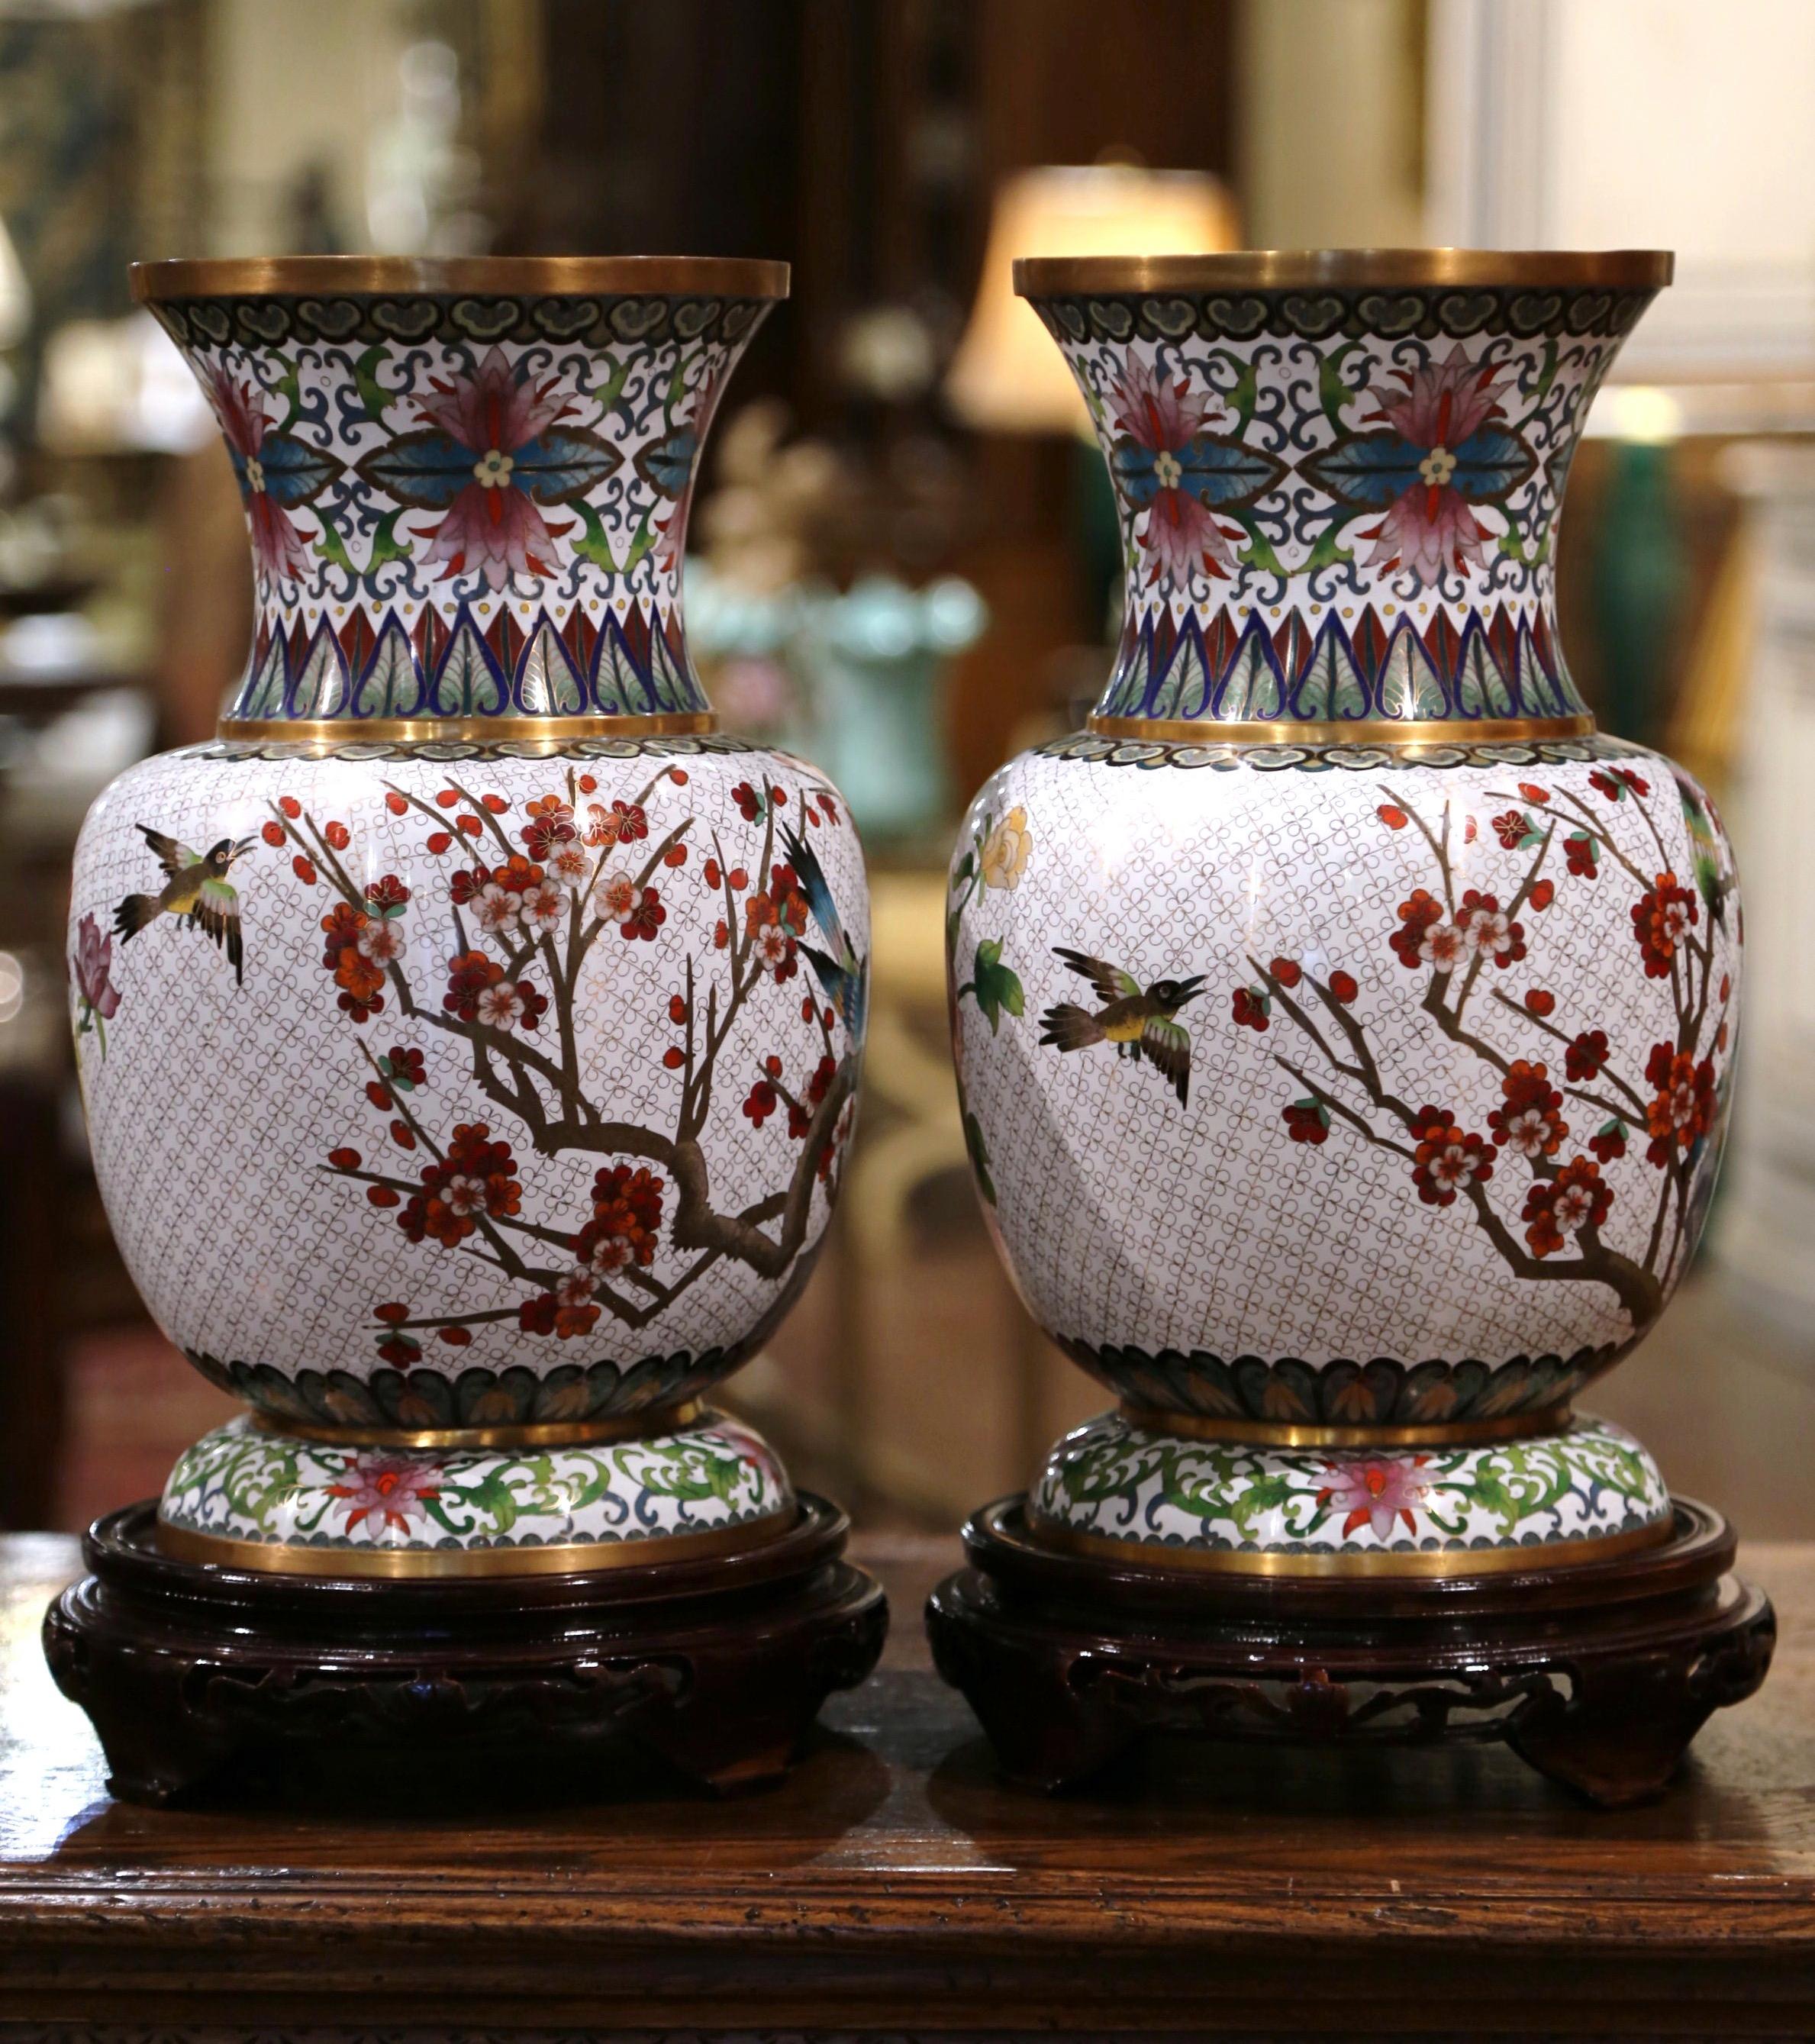 Pair of 20th Century Chinese Cloisonné Enamel Vases on Stand with Bird Decor 1